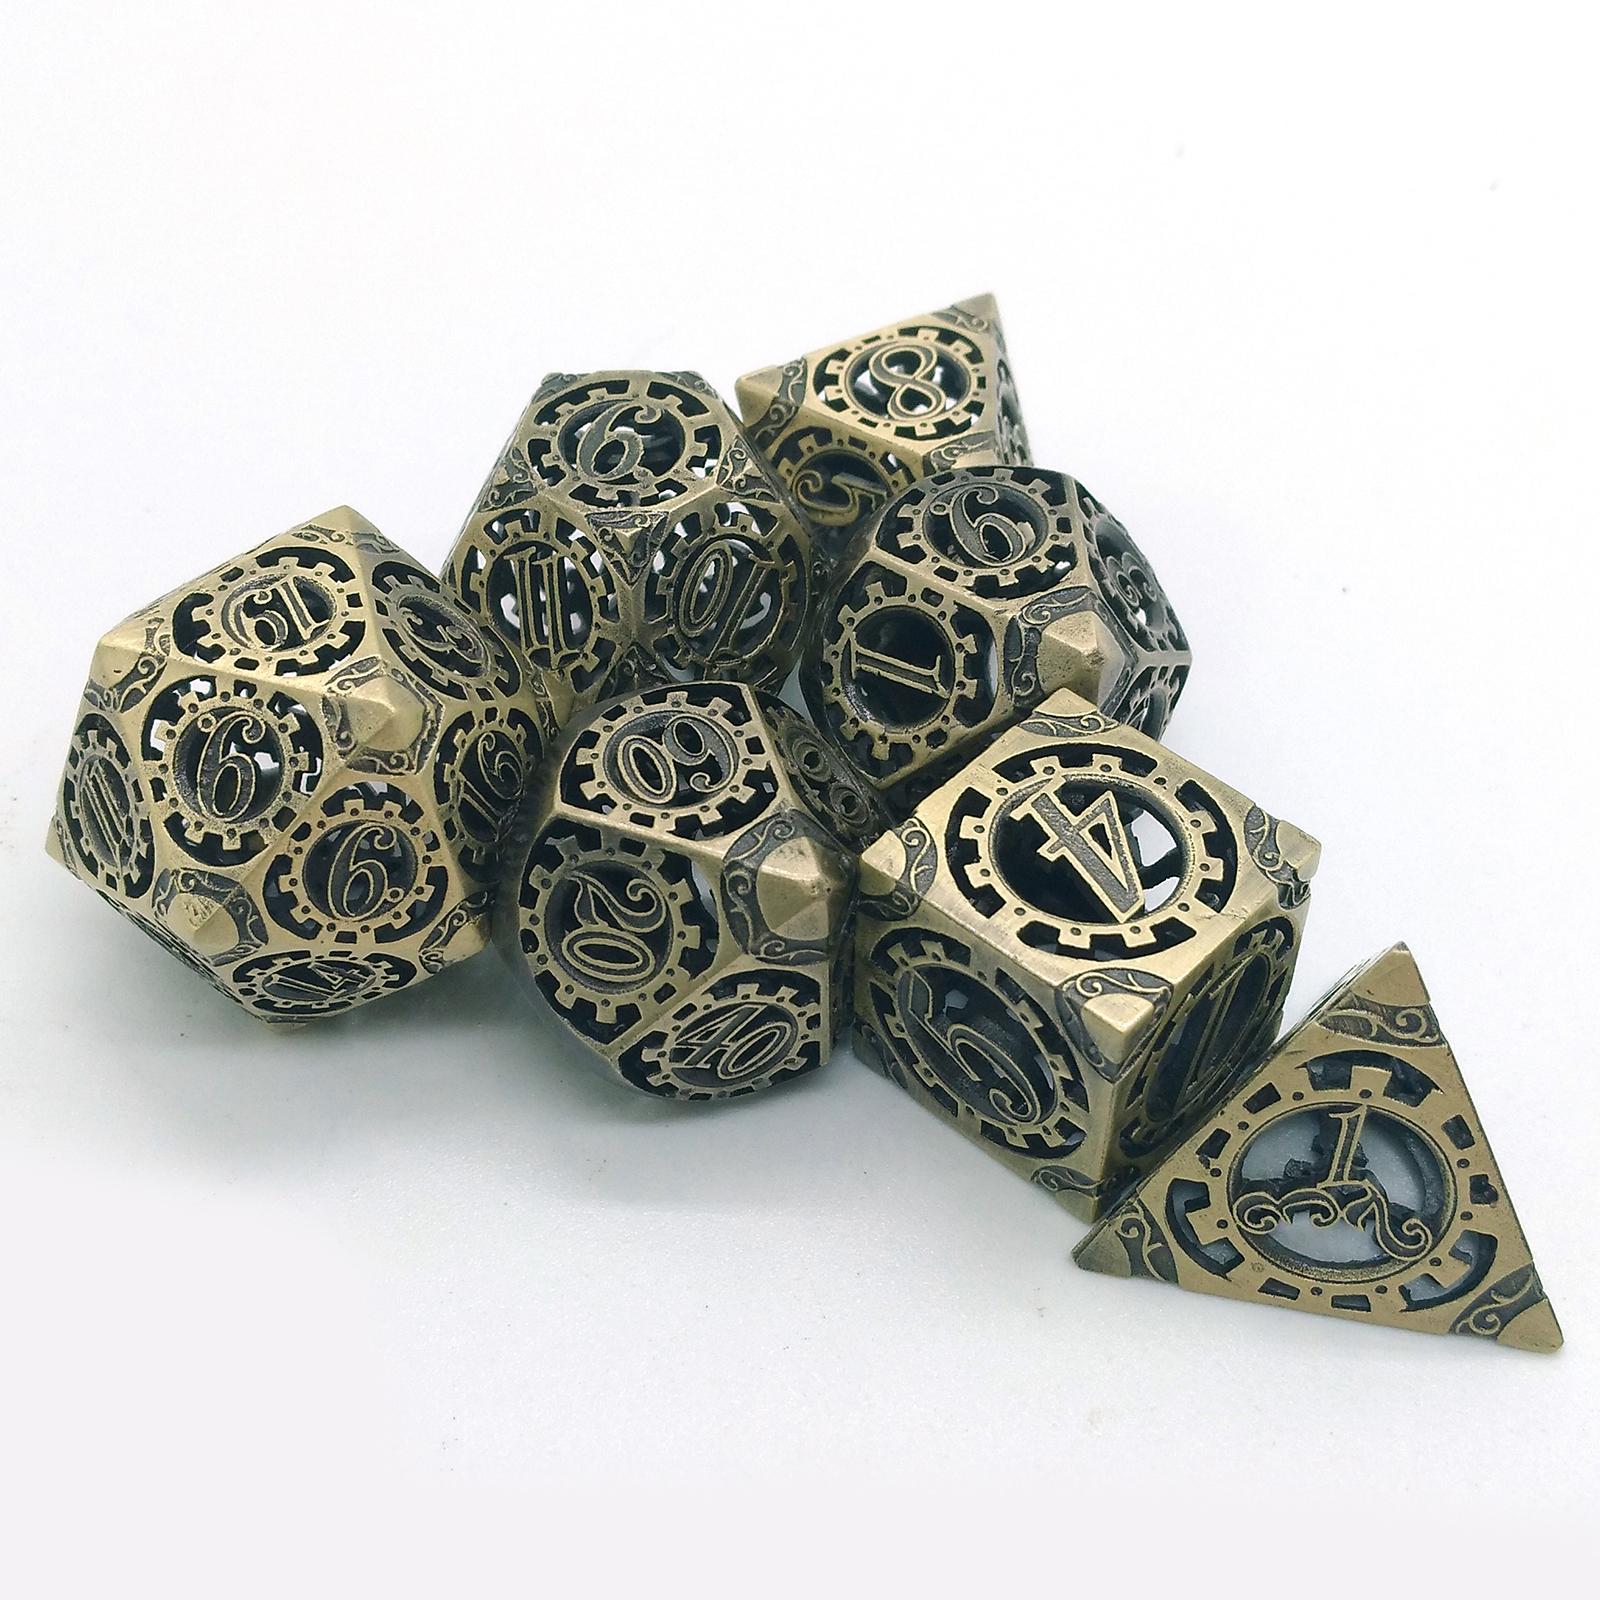 7x Hollow Creative Metal Polyhedral Dice Game for RPG Table Game Bronze